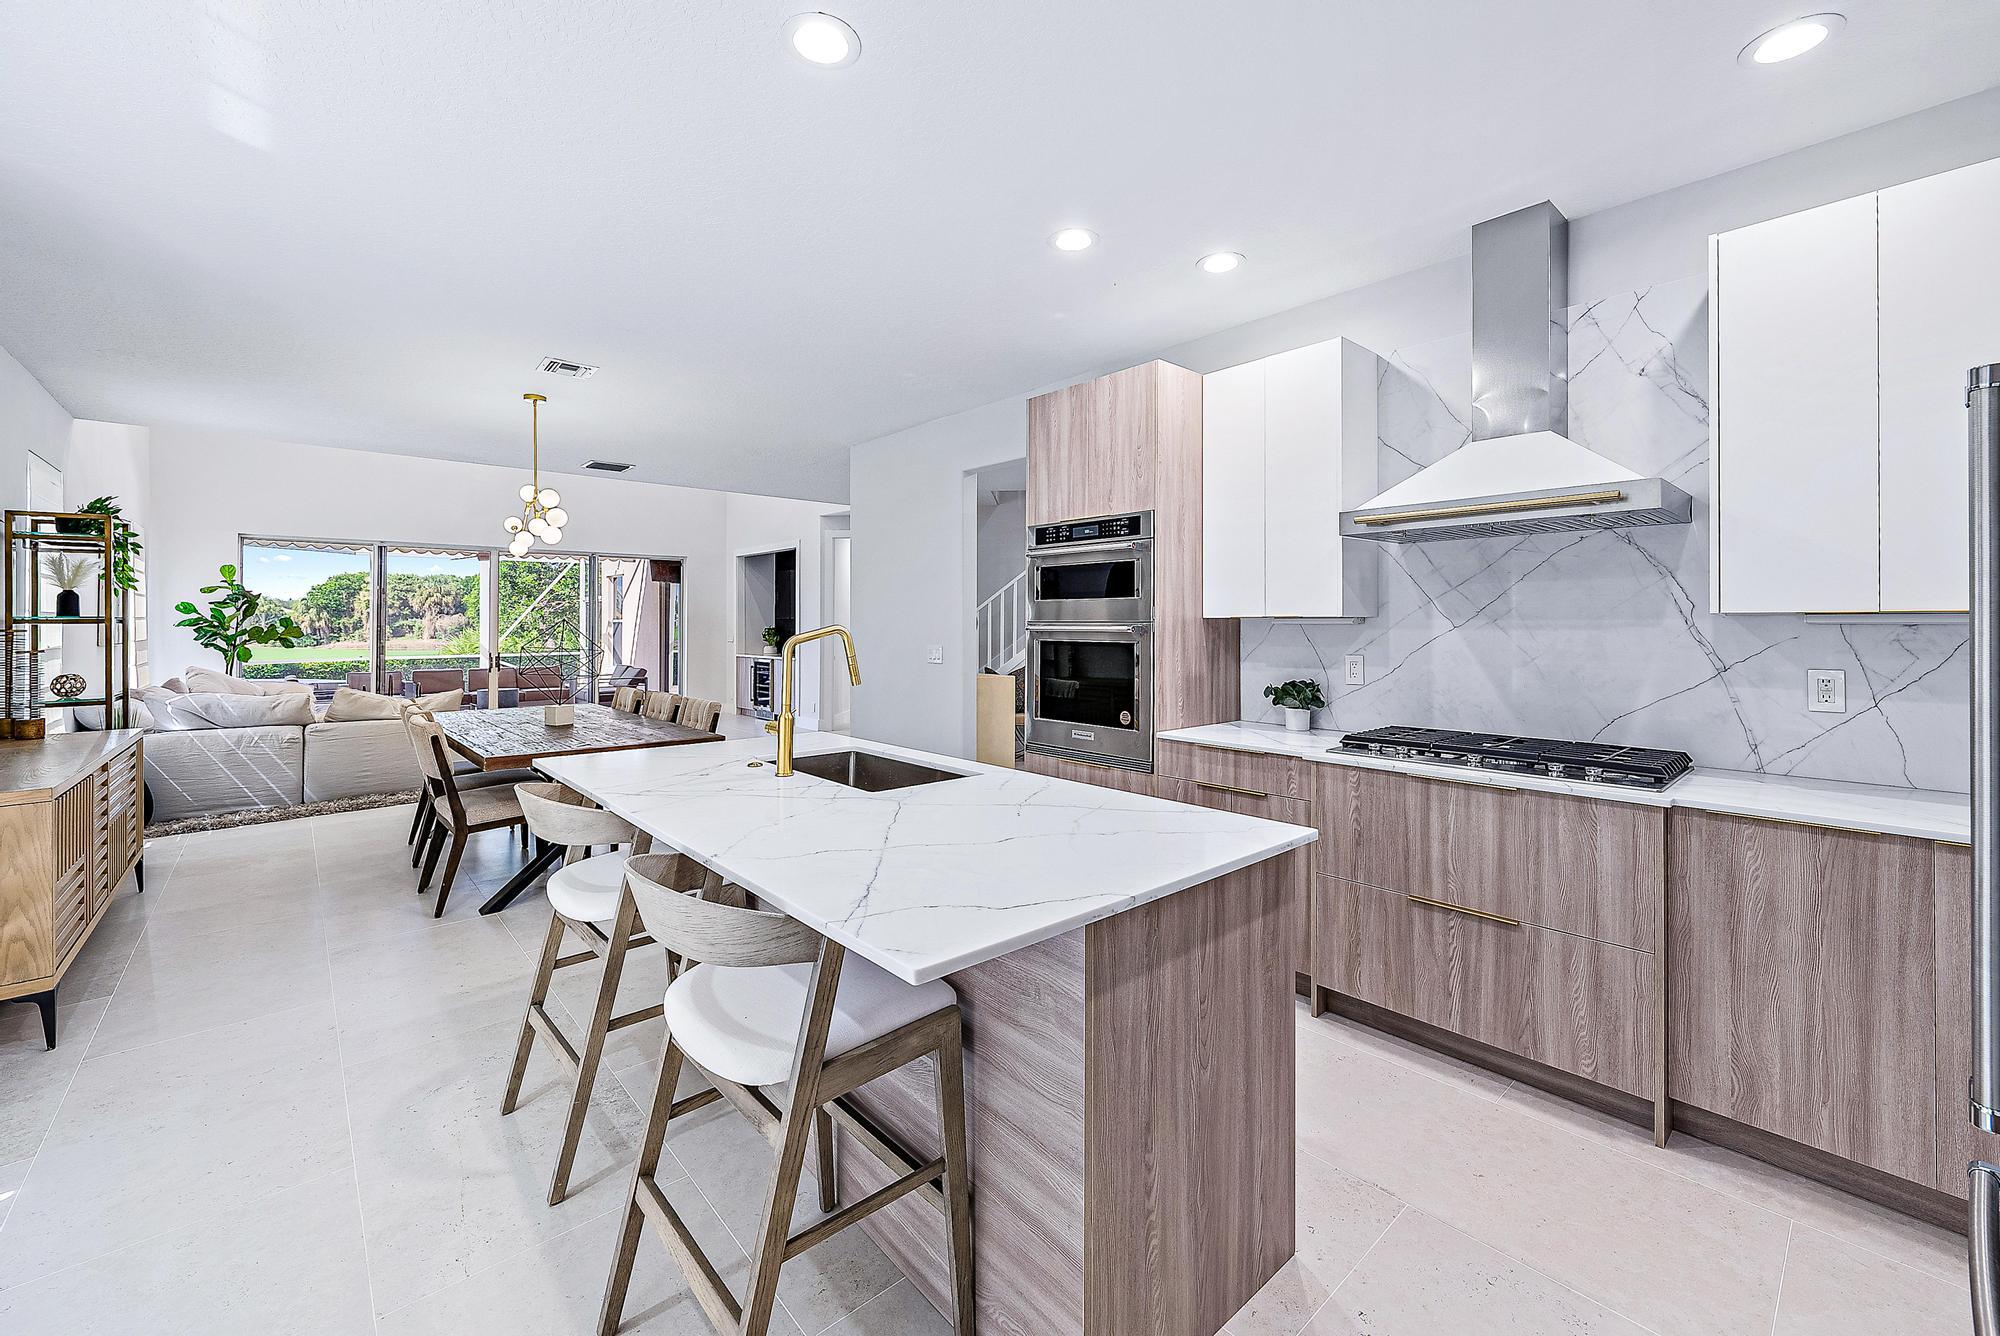 a kitchen with stainless steel appliances a table chairs sink and cabinets